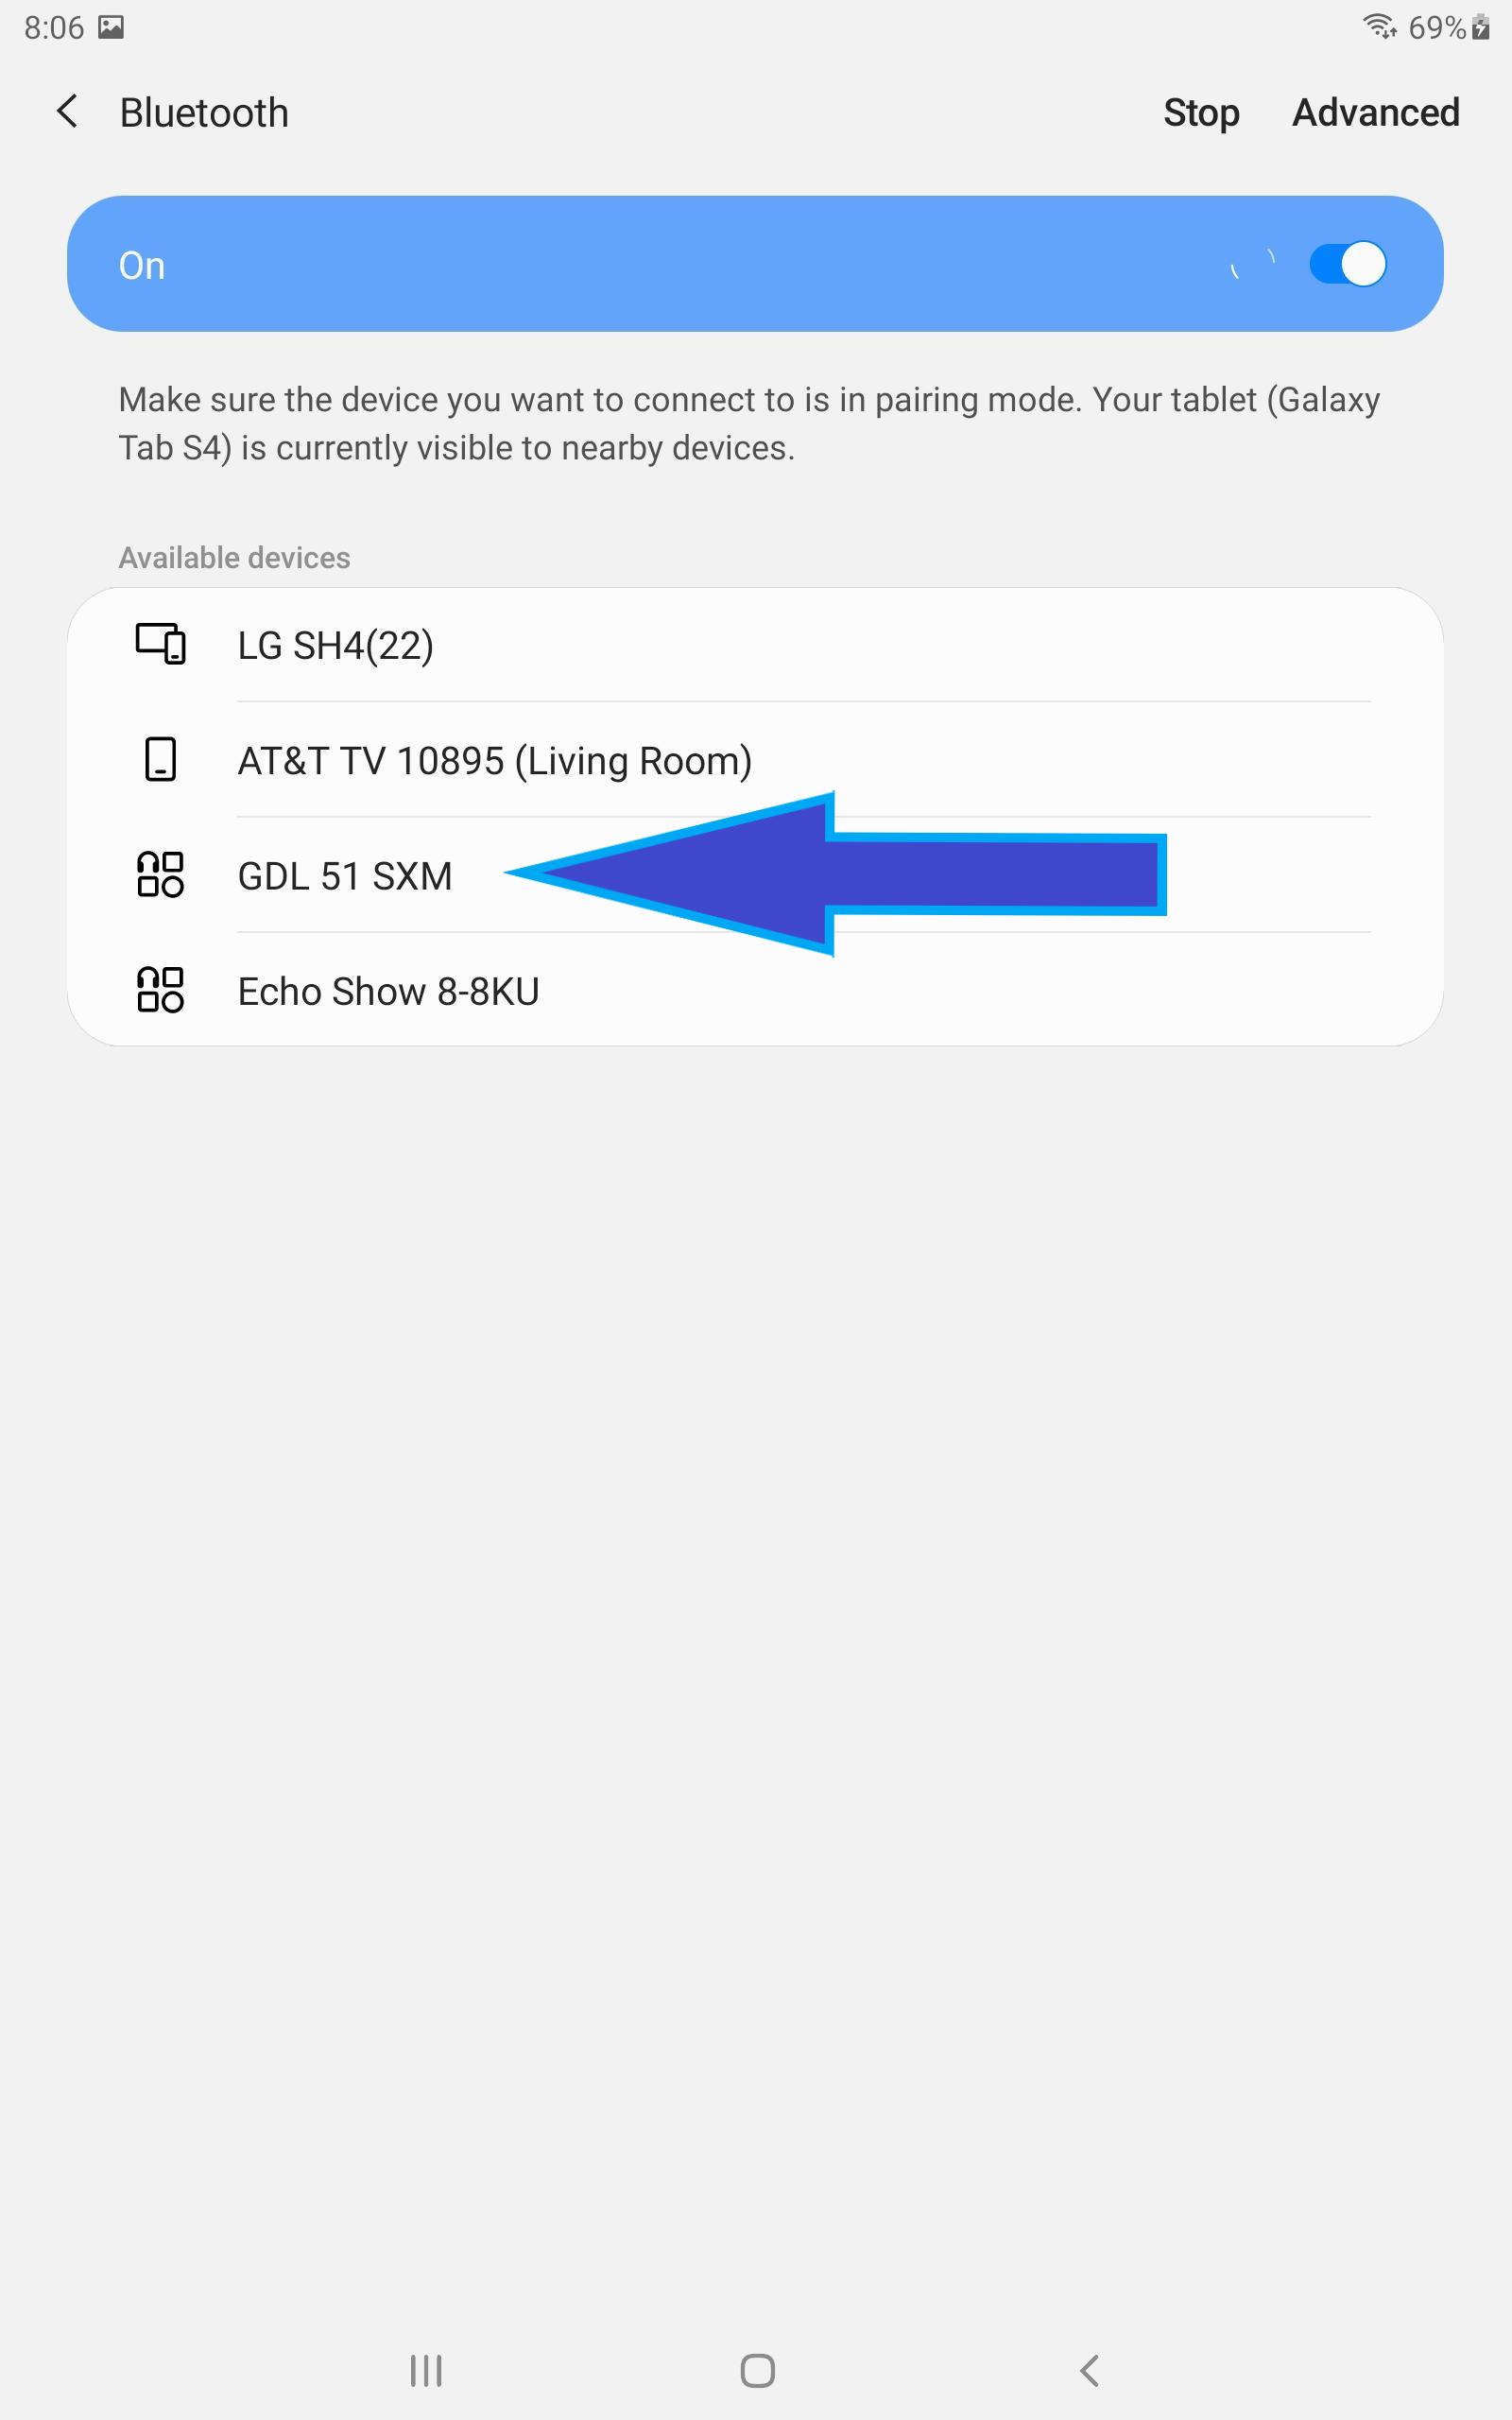 How to enable the Bluetooth setting on an Android TV.